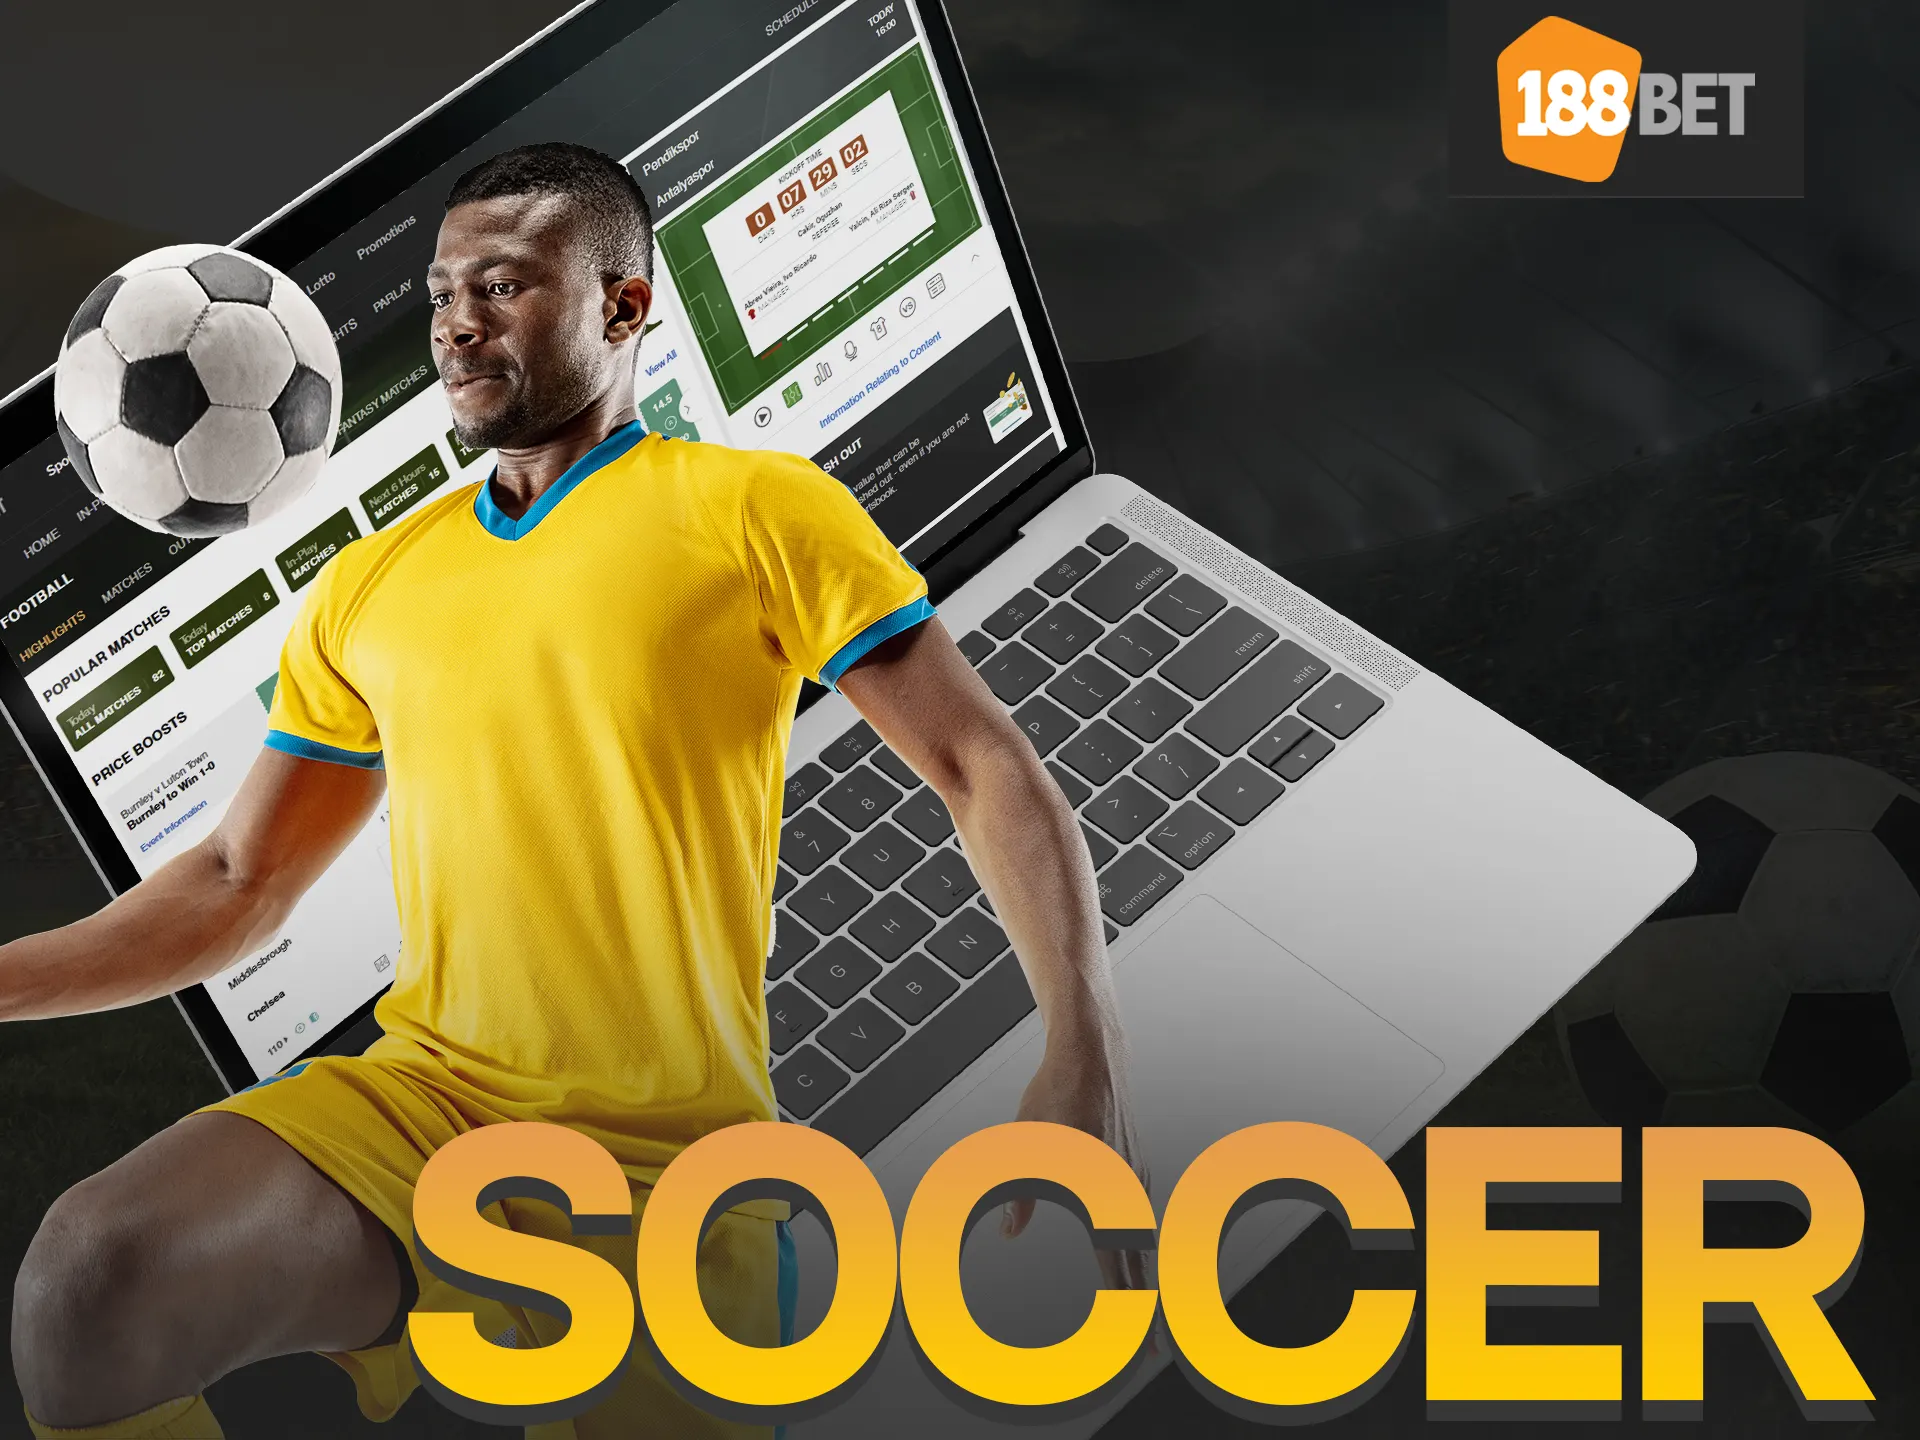 Place soccer bets at 188bet.